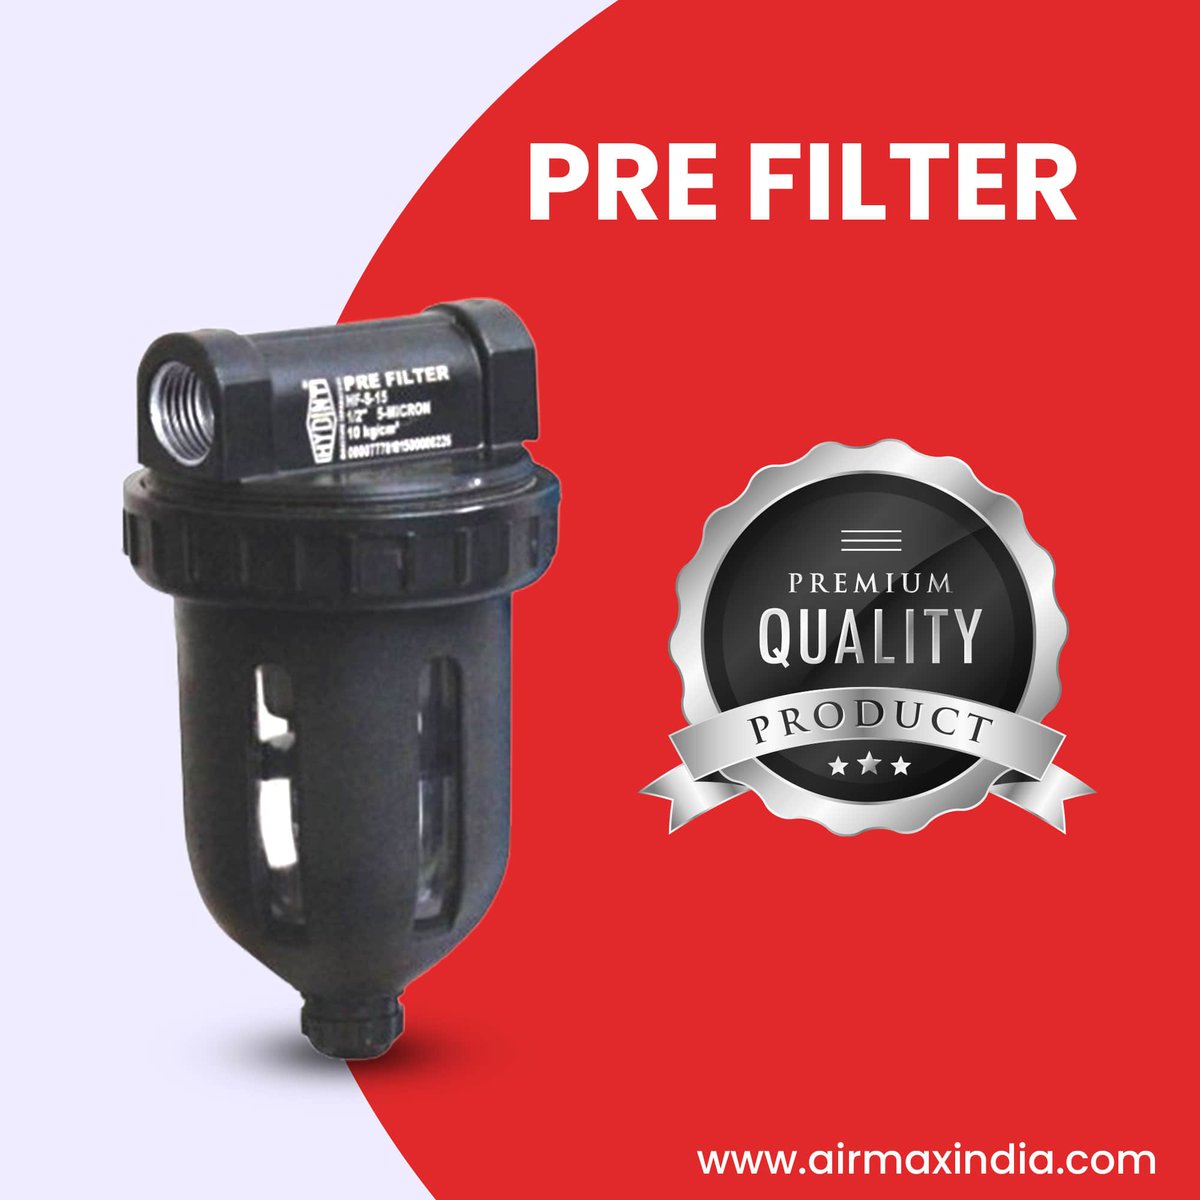 Improve filtration with Airmax Pneumatics Pre Filters! Specifically designed for longevity and peak performance, featuring an aluminium Press Die Cast body. 🛠️

#airmaxpneumatics #Manufacturer #Exporter #Technology #MakeInIndia #G20 #India #Viral #trending #instagram #post